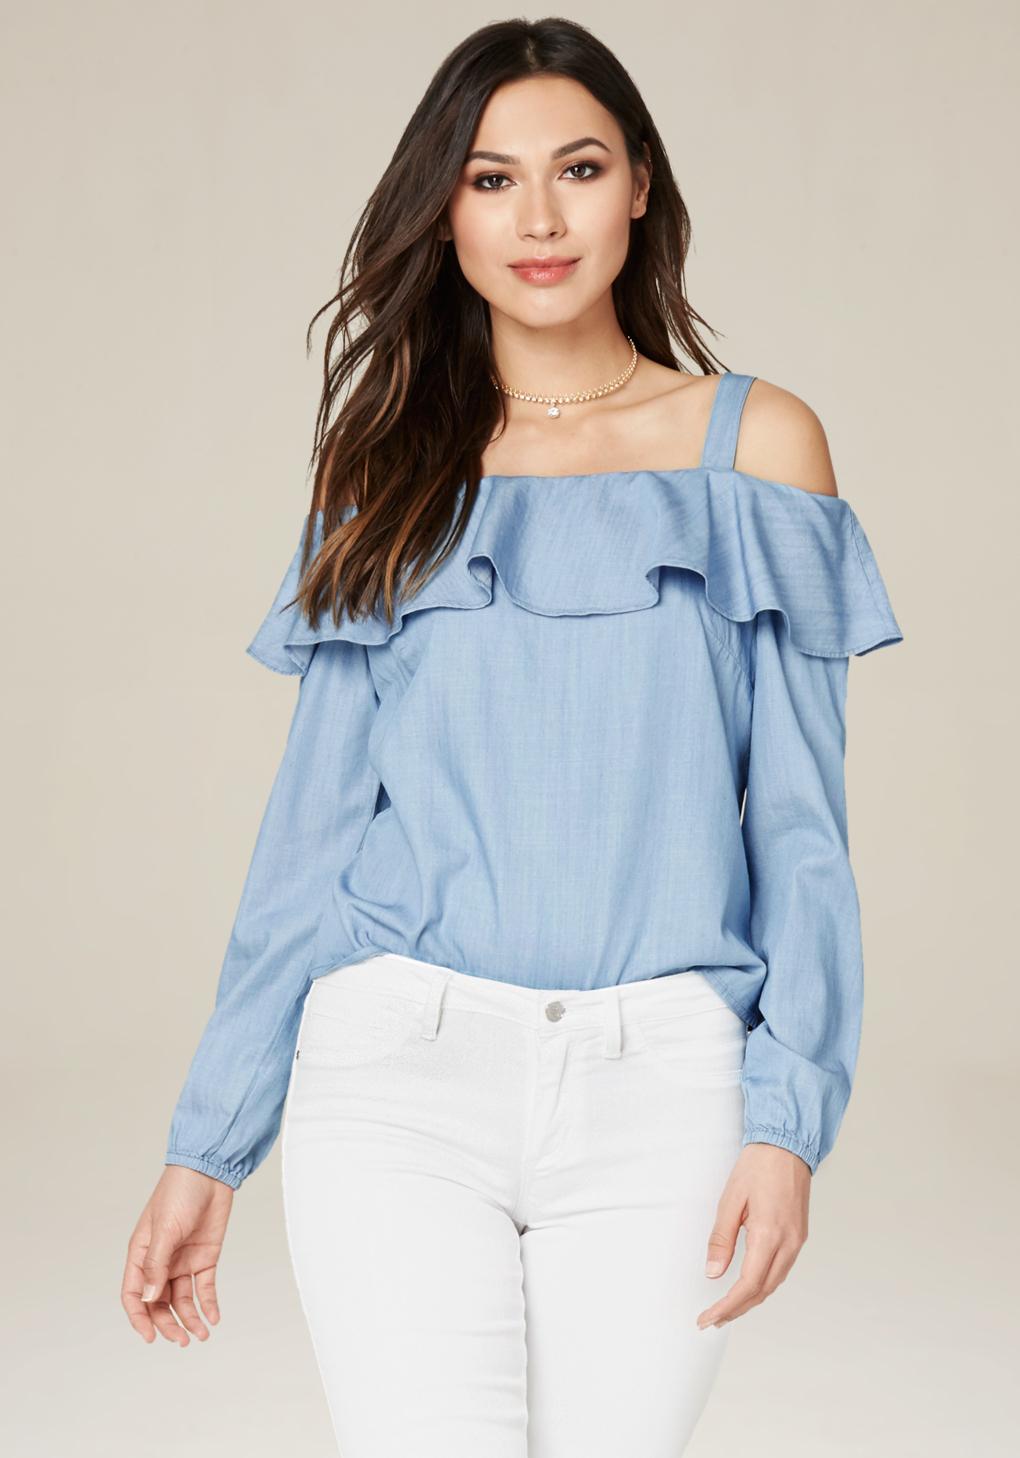 Lyst - Bebe Lizzay Chambray Top in Blue